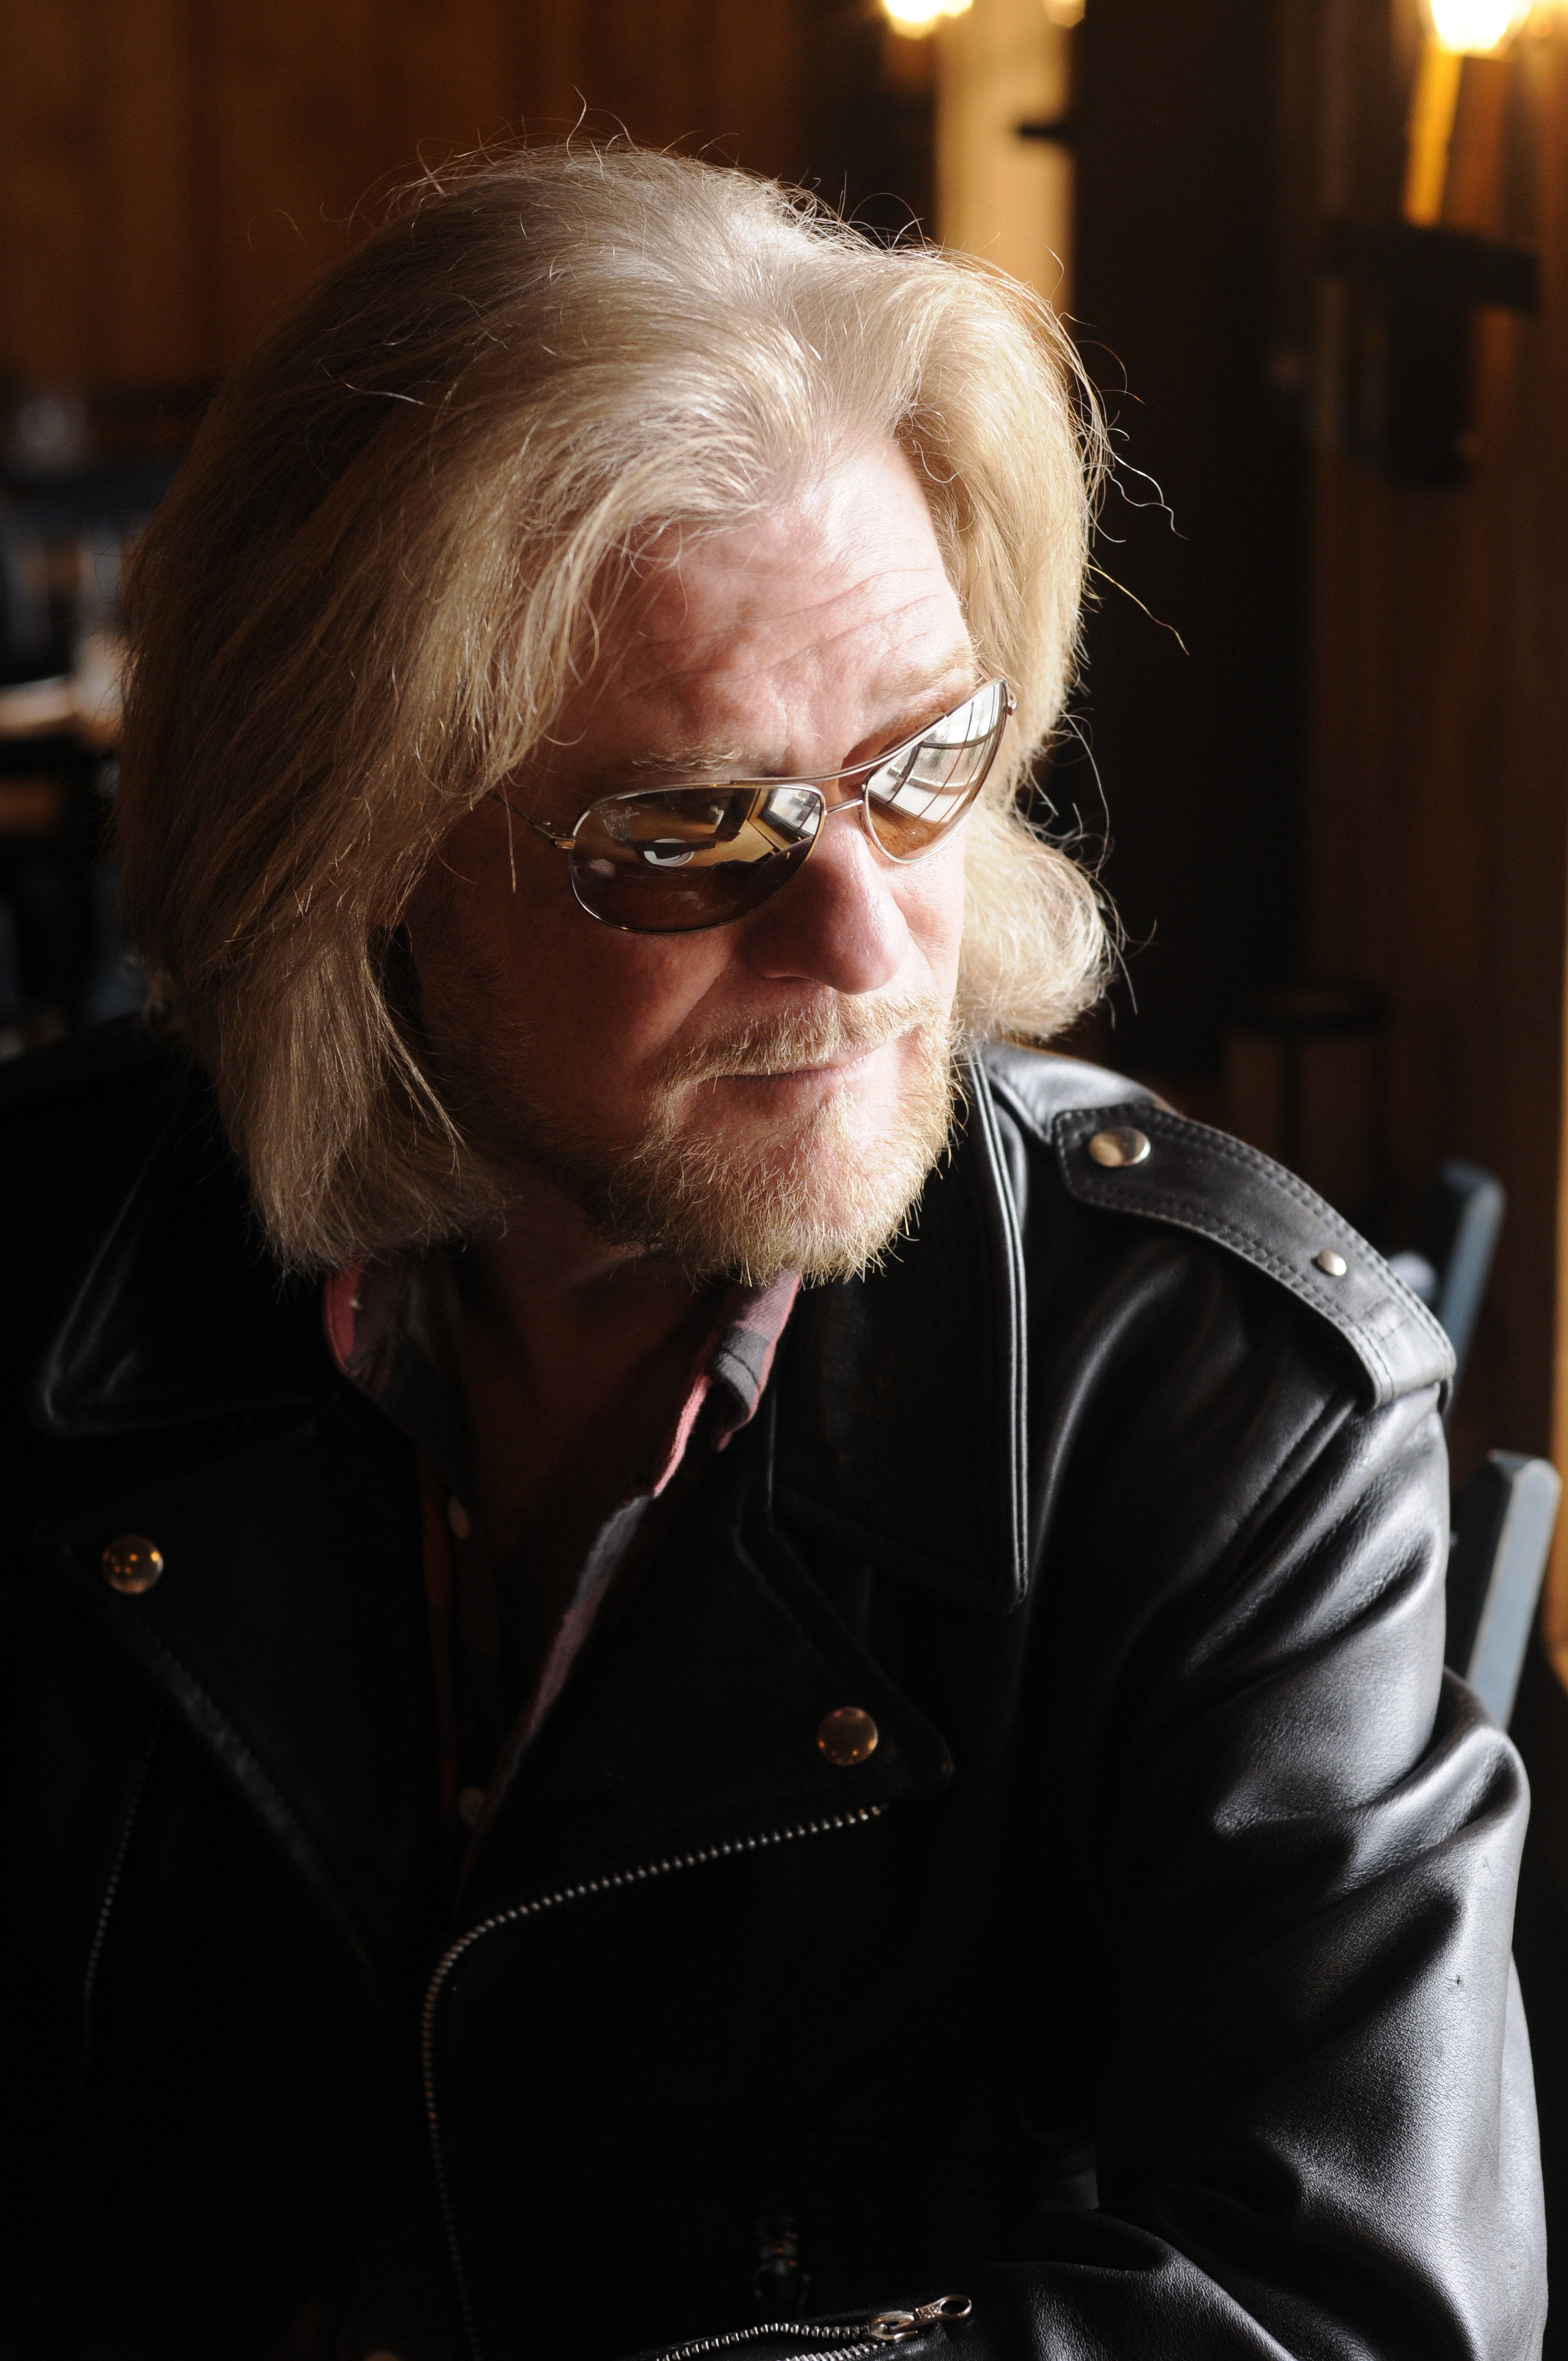  4/27/2015 - Pawling, NY - Daryl Hall, Rock and Roll Hall of Famer and co-founder of Hall &amp; Oates, pictured in his club, Daryl's House.&nbsp; 